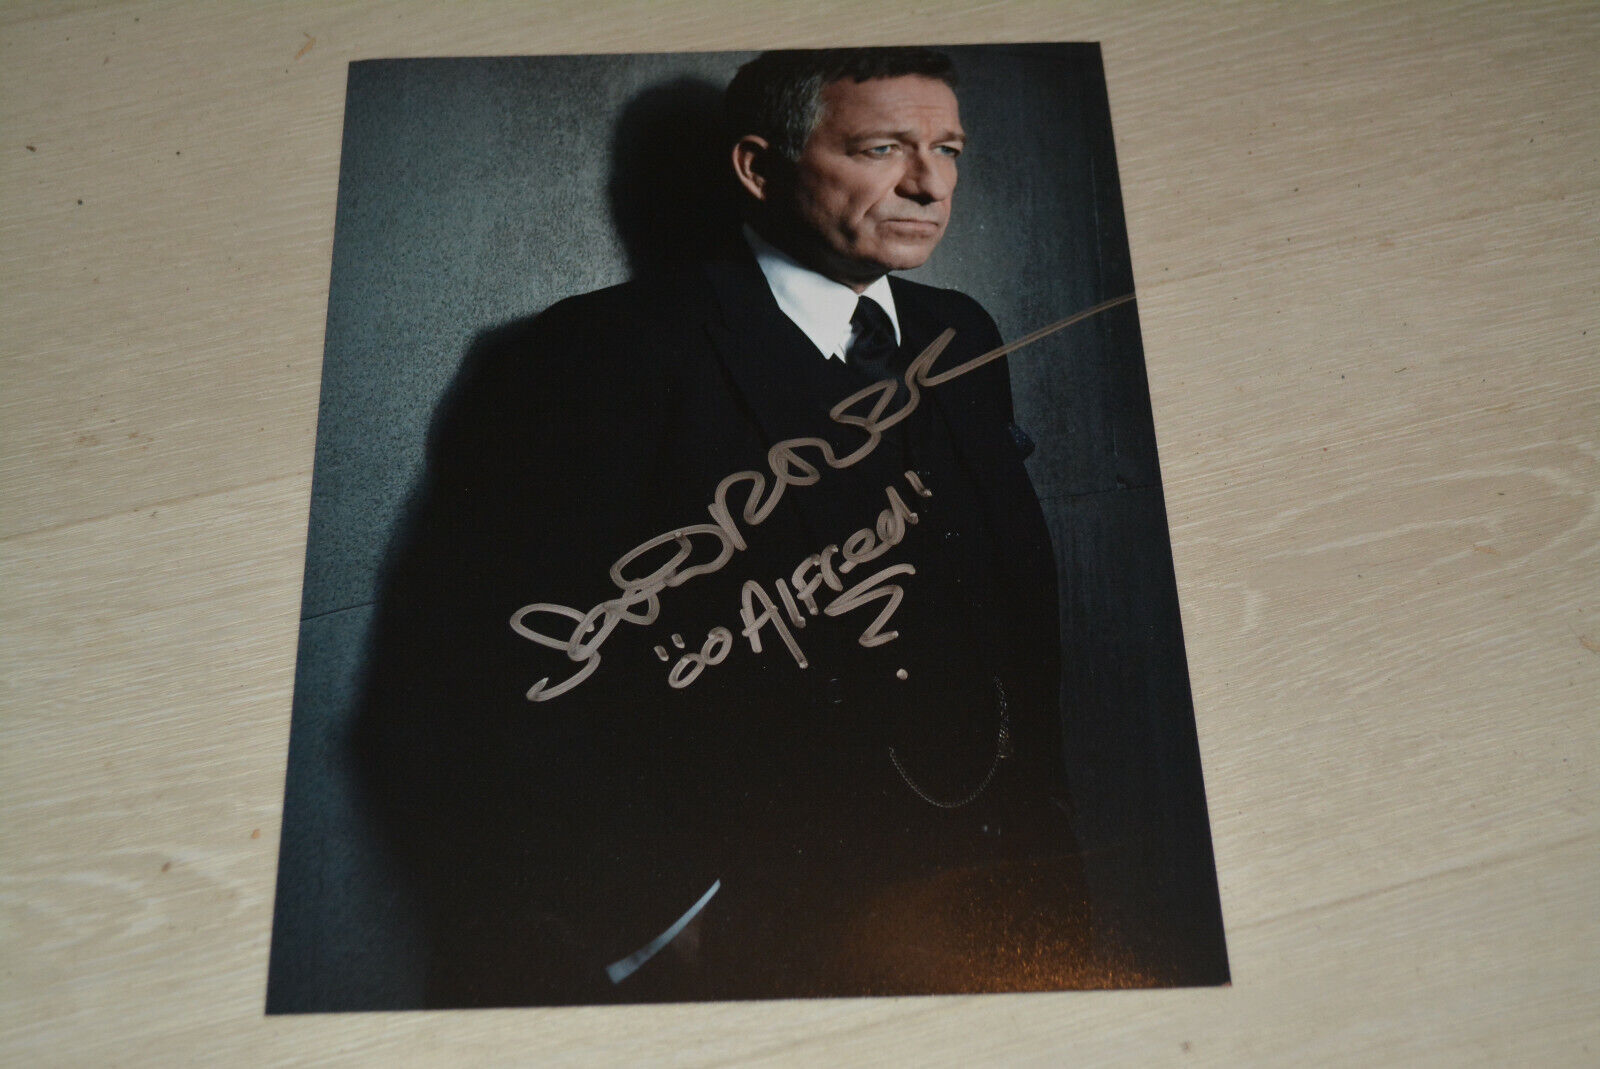 SEAN PERTWEE signed autograph In Person 8x10 20x25 cm GOTHAM Alfred